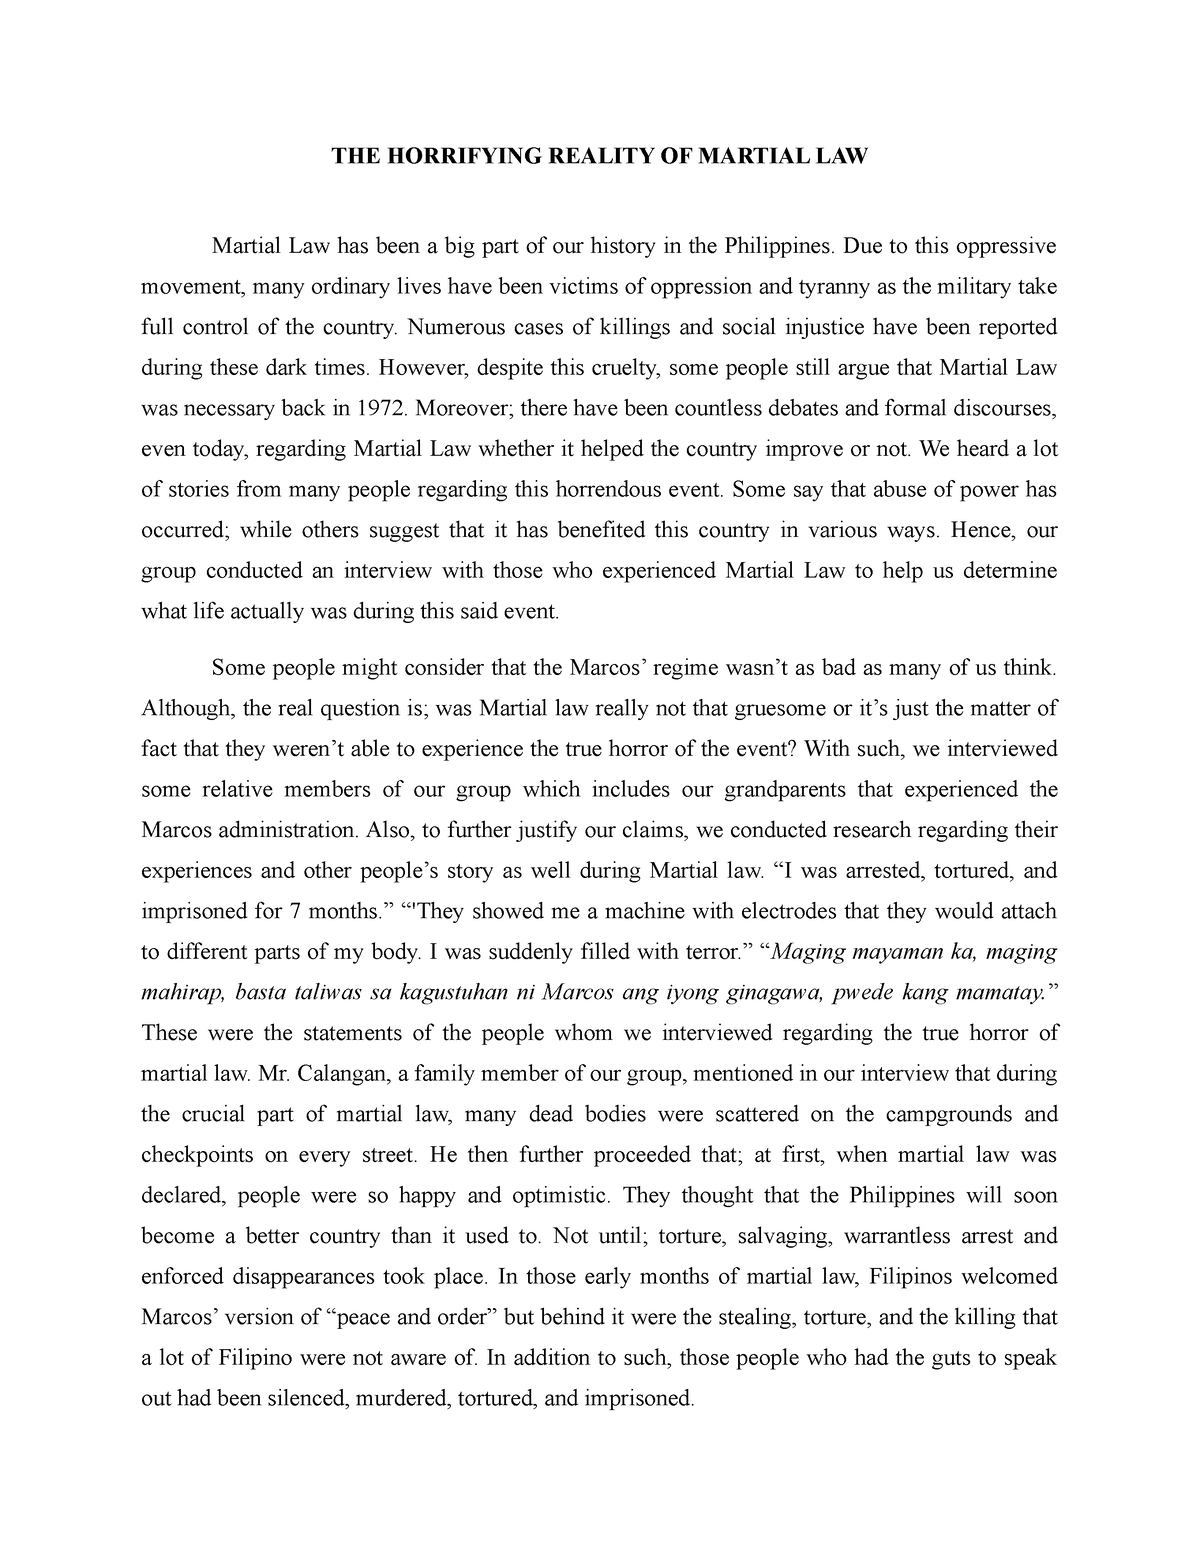 essay about martial law 500 words